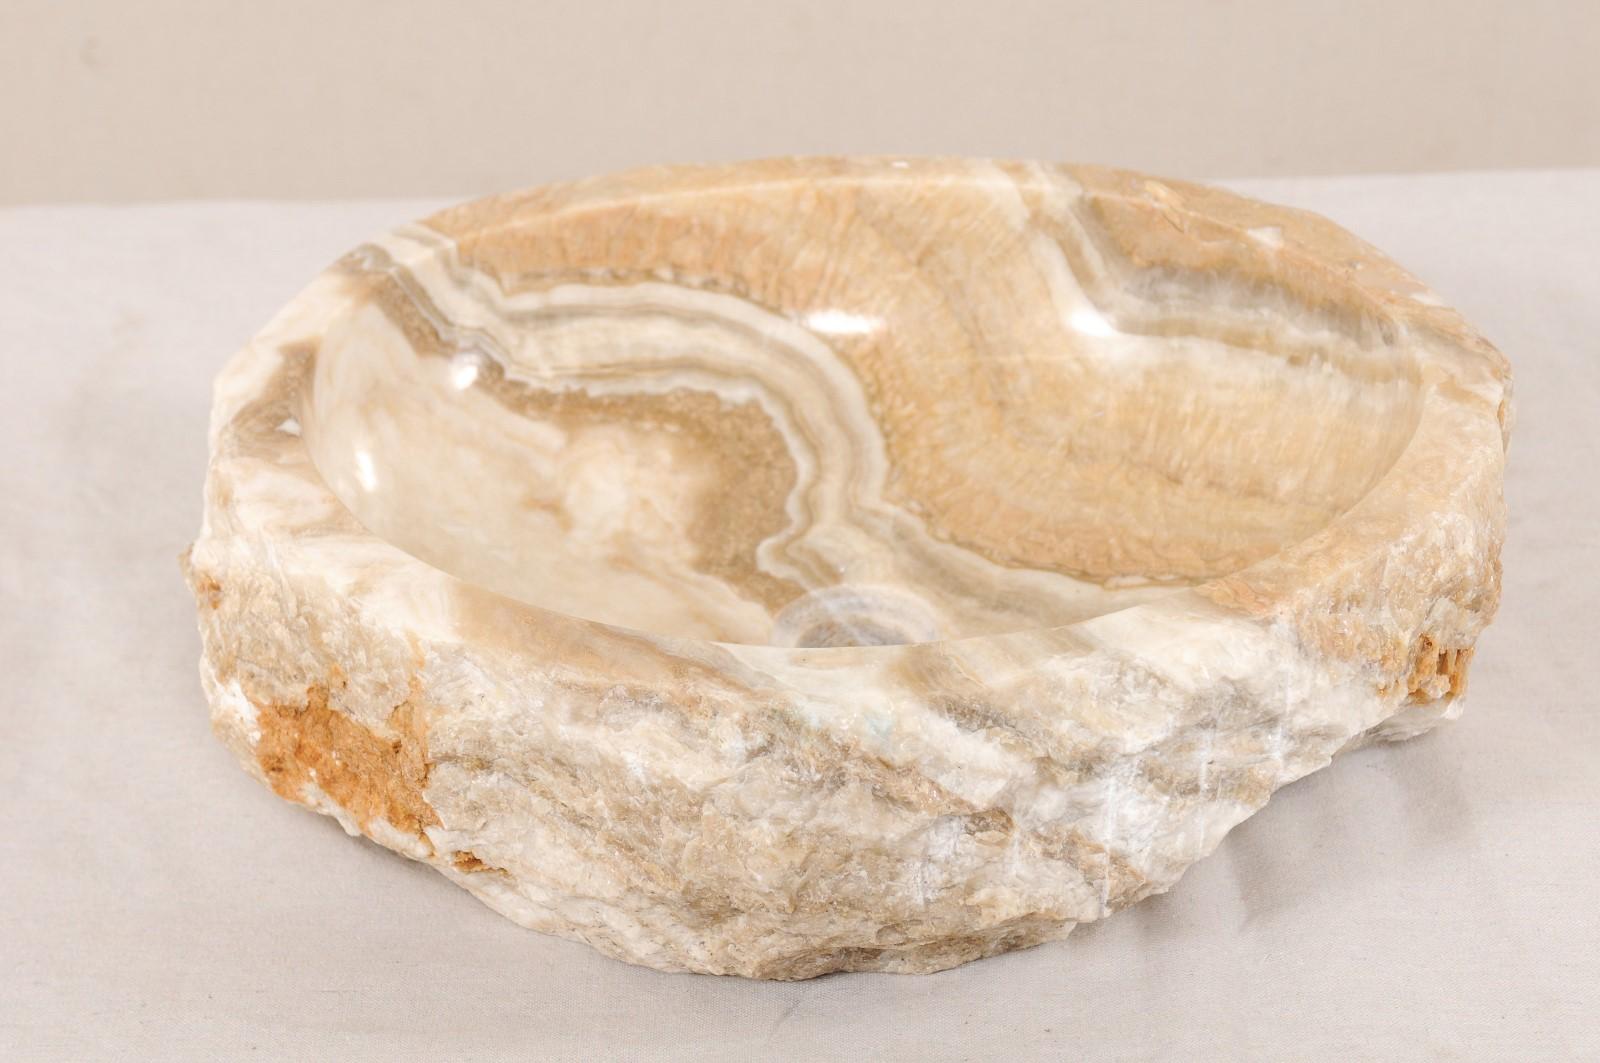 Carved Natural Onyx Sink Basin in Cream, White, Beige and Grey